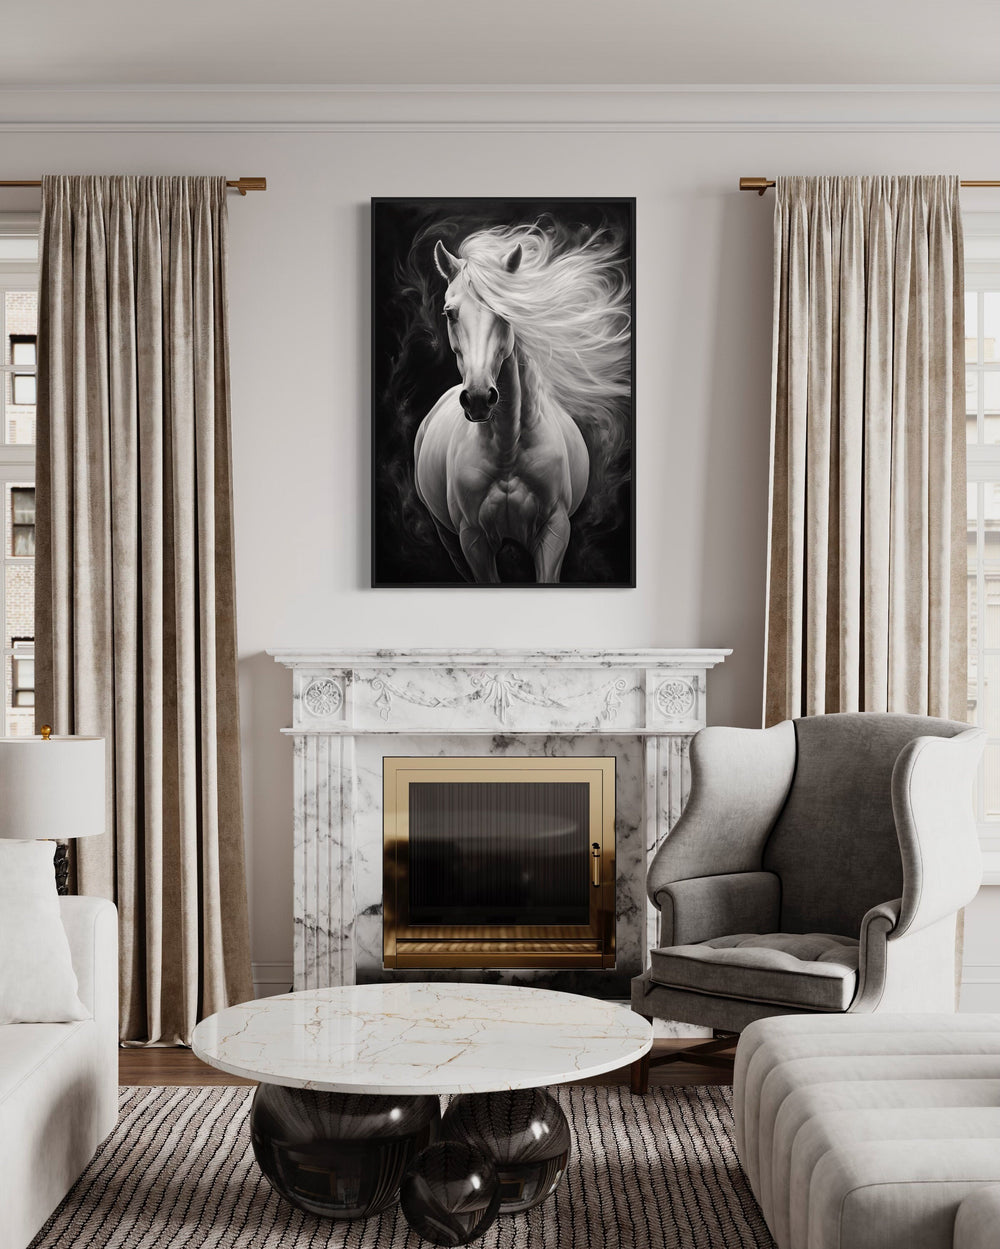 Beautiful White Horse On Black Background Canvas Wall Art above fireplace